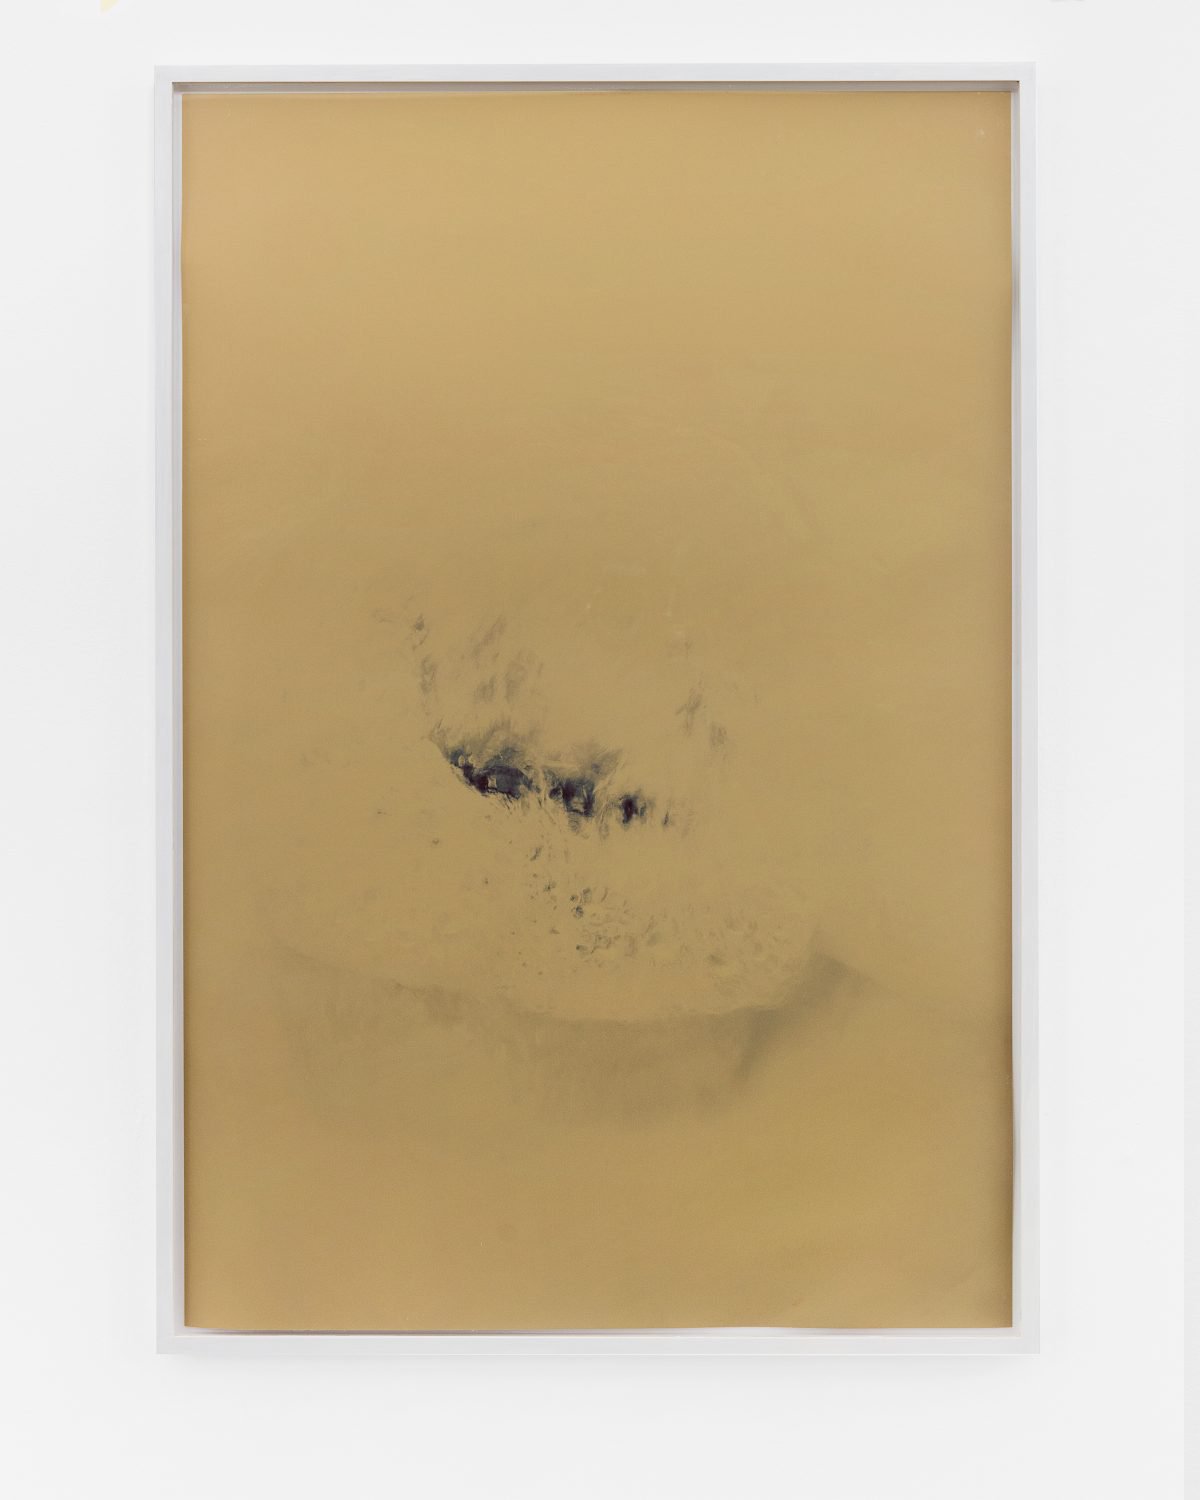 Lisa HolzerFlush (with and without flash), 2019Pigment print on cotton paper, semigloss enamel on wood110.3 x 74.5 cm